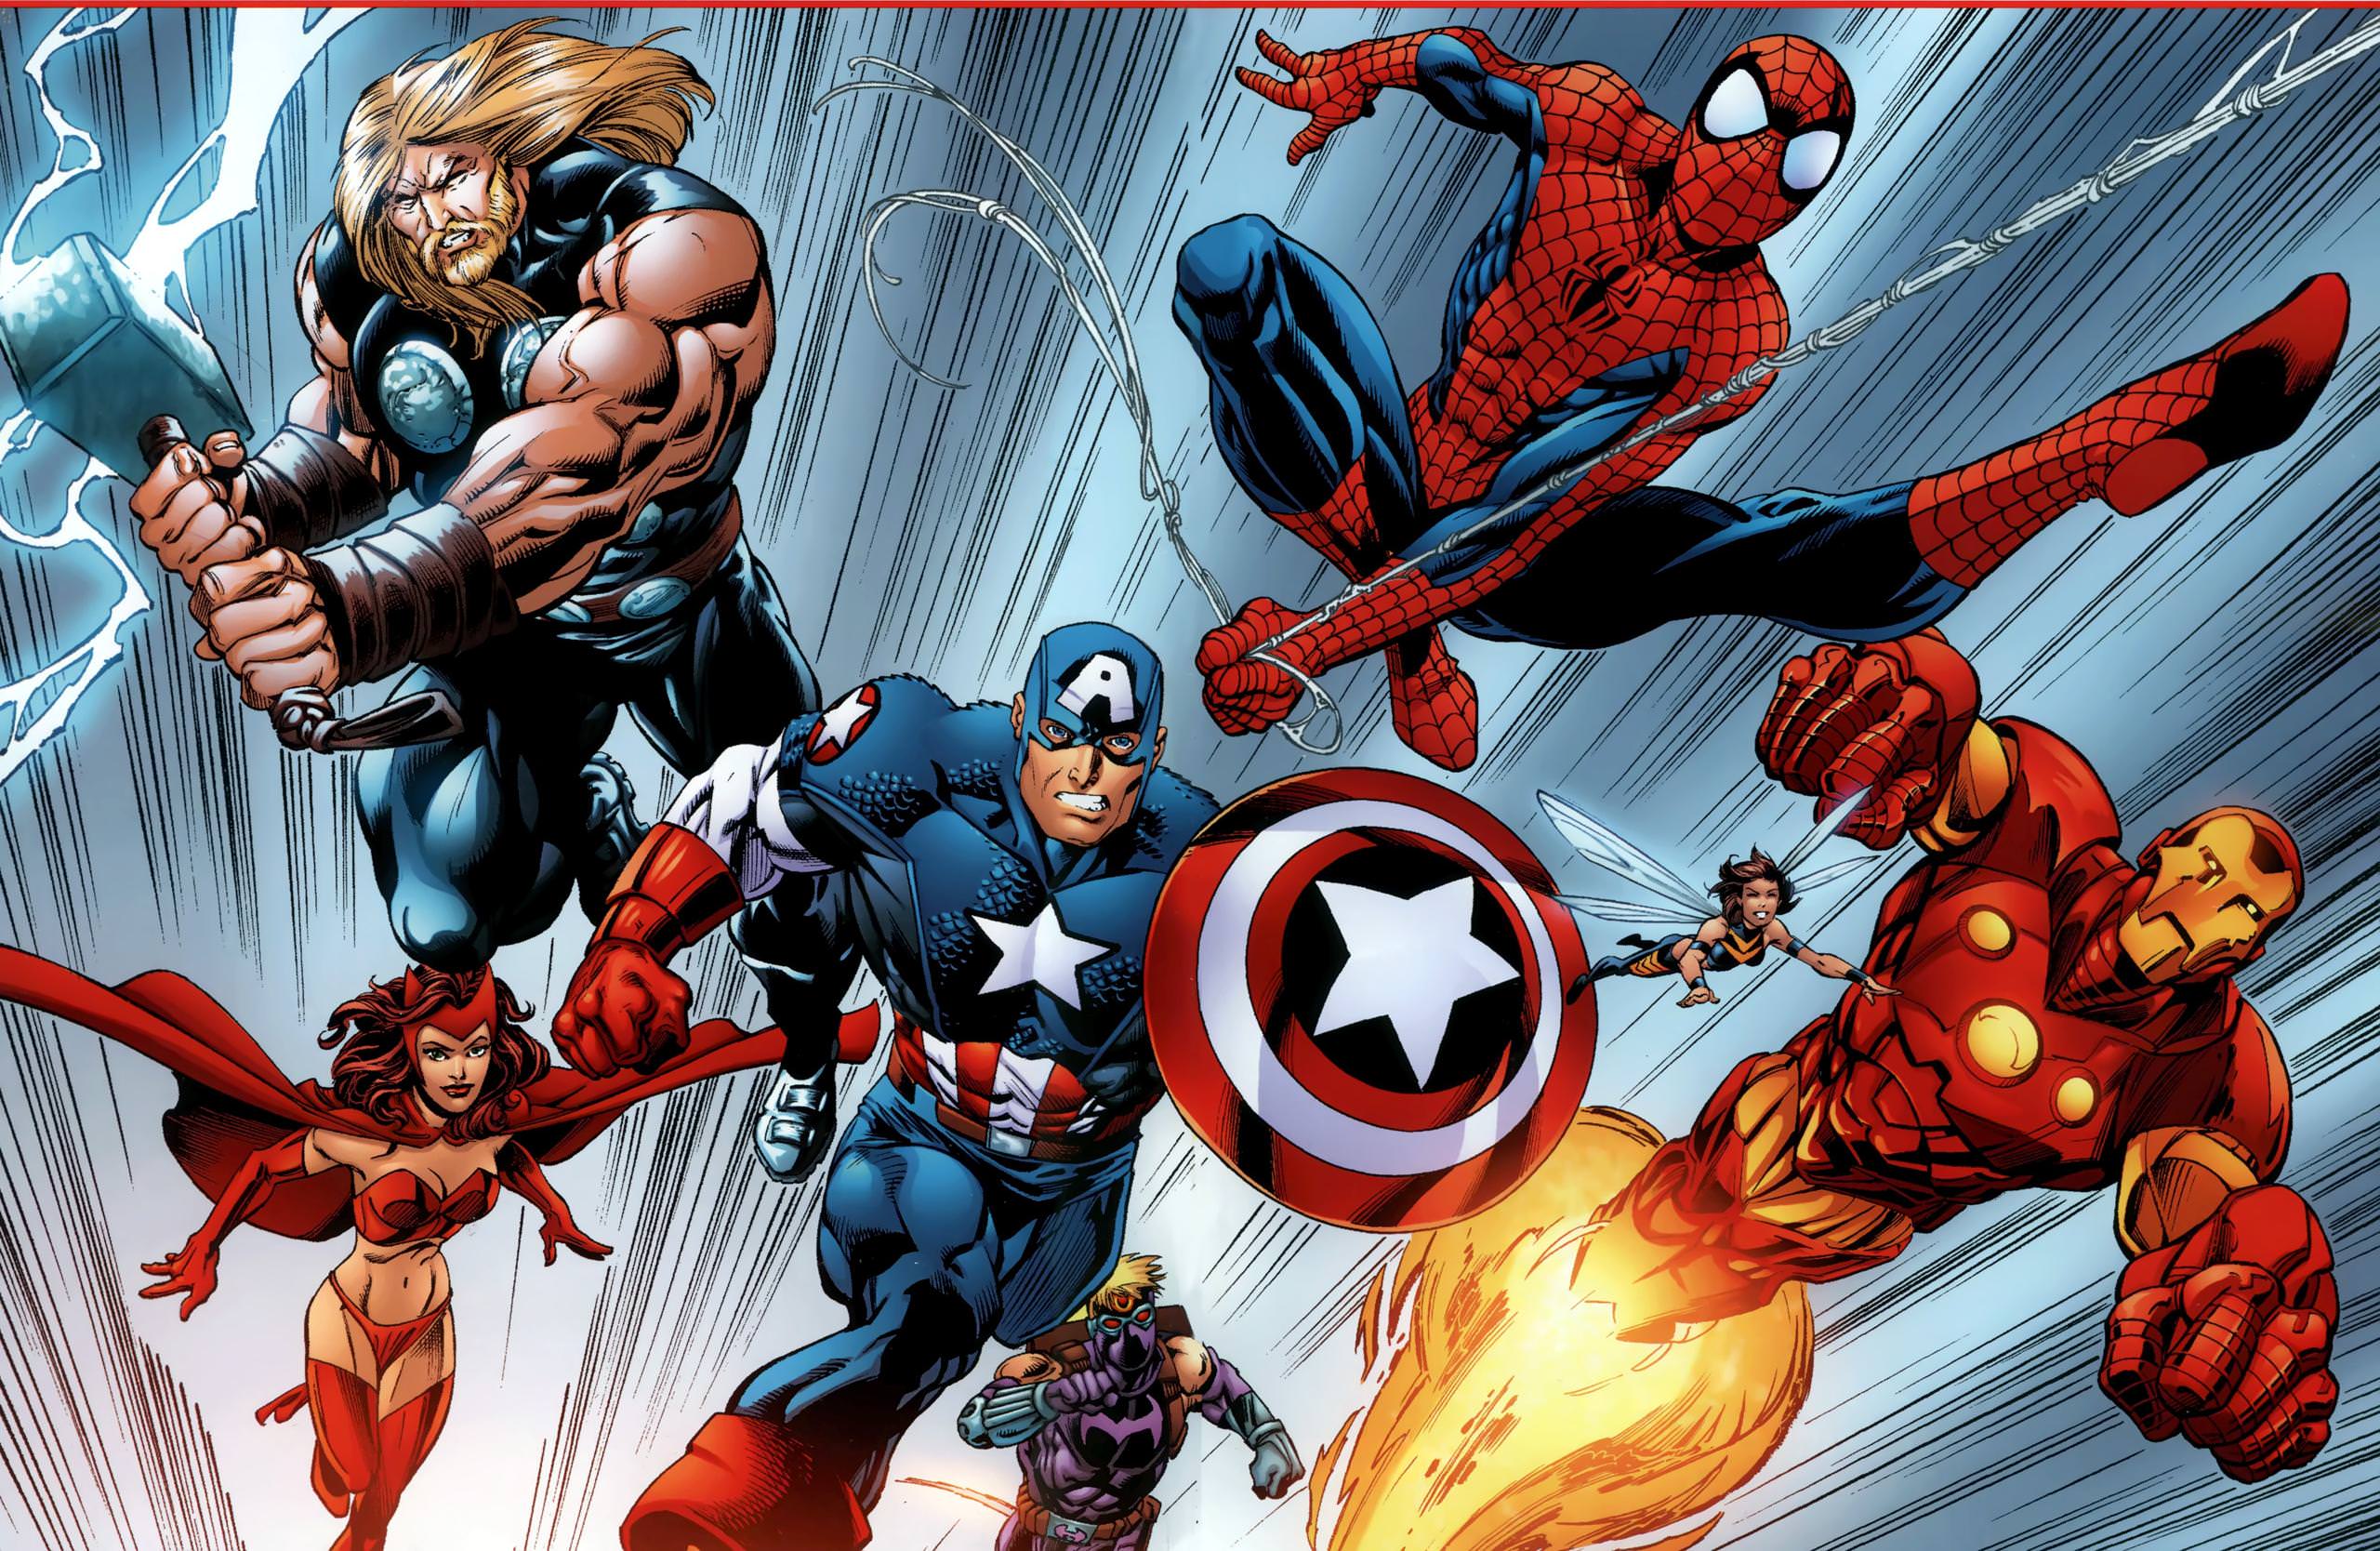 4524217_spider-man-will-join-the-avengers